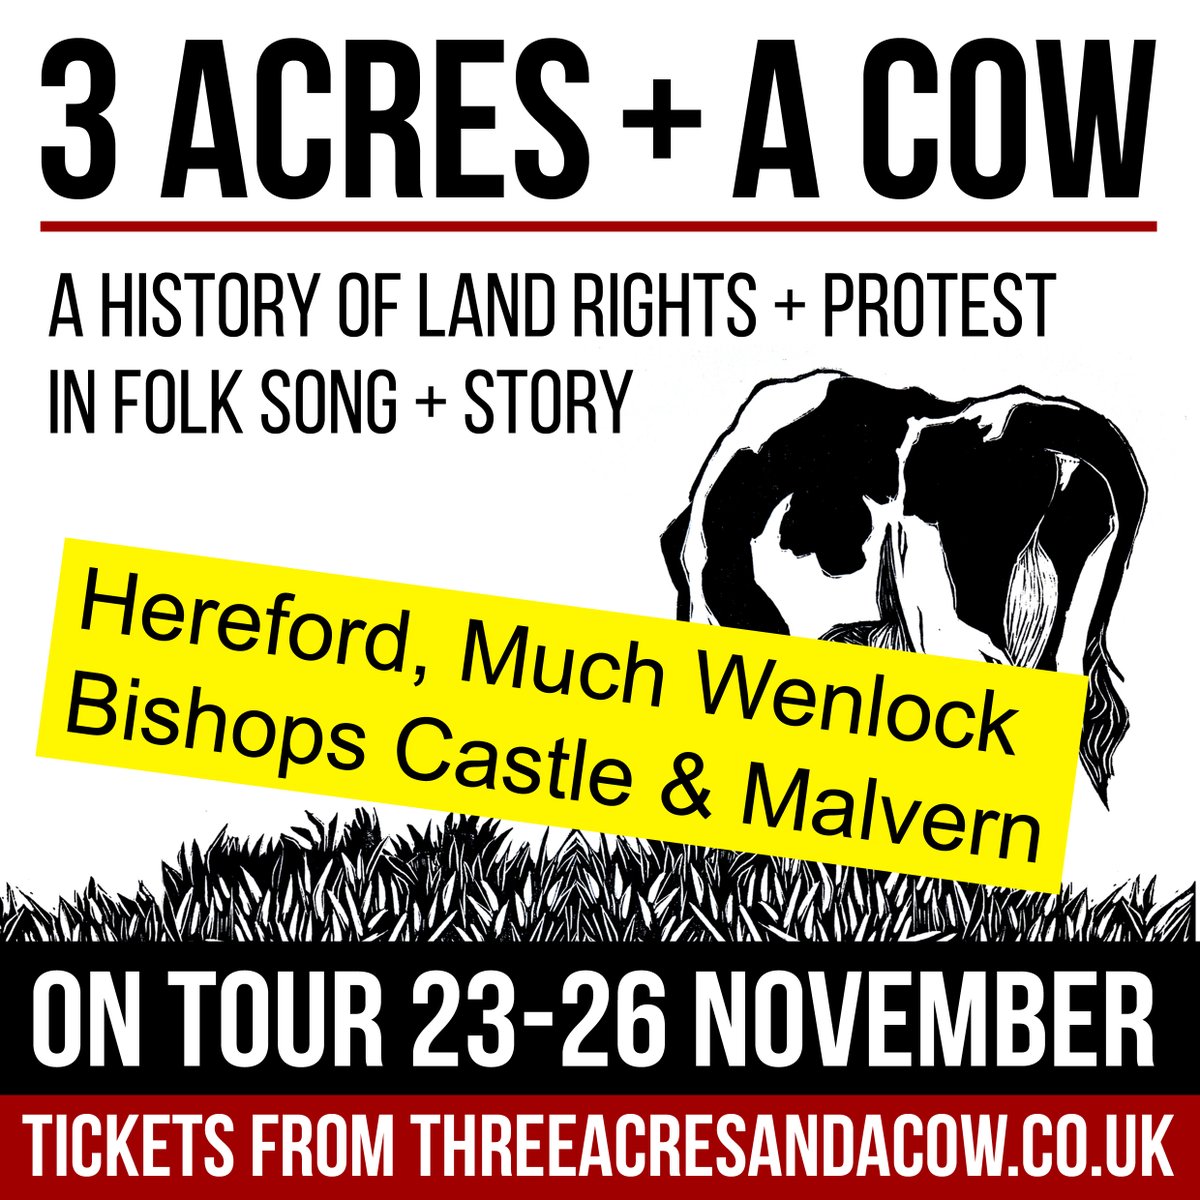 November cow tour - please tell pals in Herefordshire, Shropshire and Worcestershire. Come and sing through 1000 yrs of English history with us, tickets via threeacresandacow.co.uk/shows/ @MalvernCube @CourtyardArts #BishopsCastle #Hereford #landrights #history #folksong